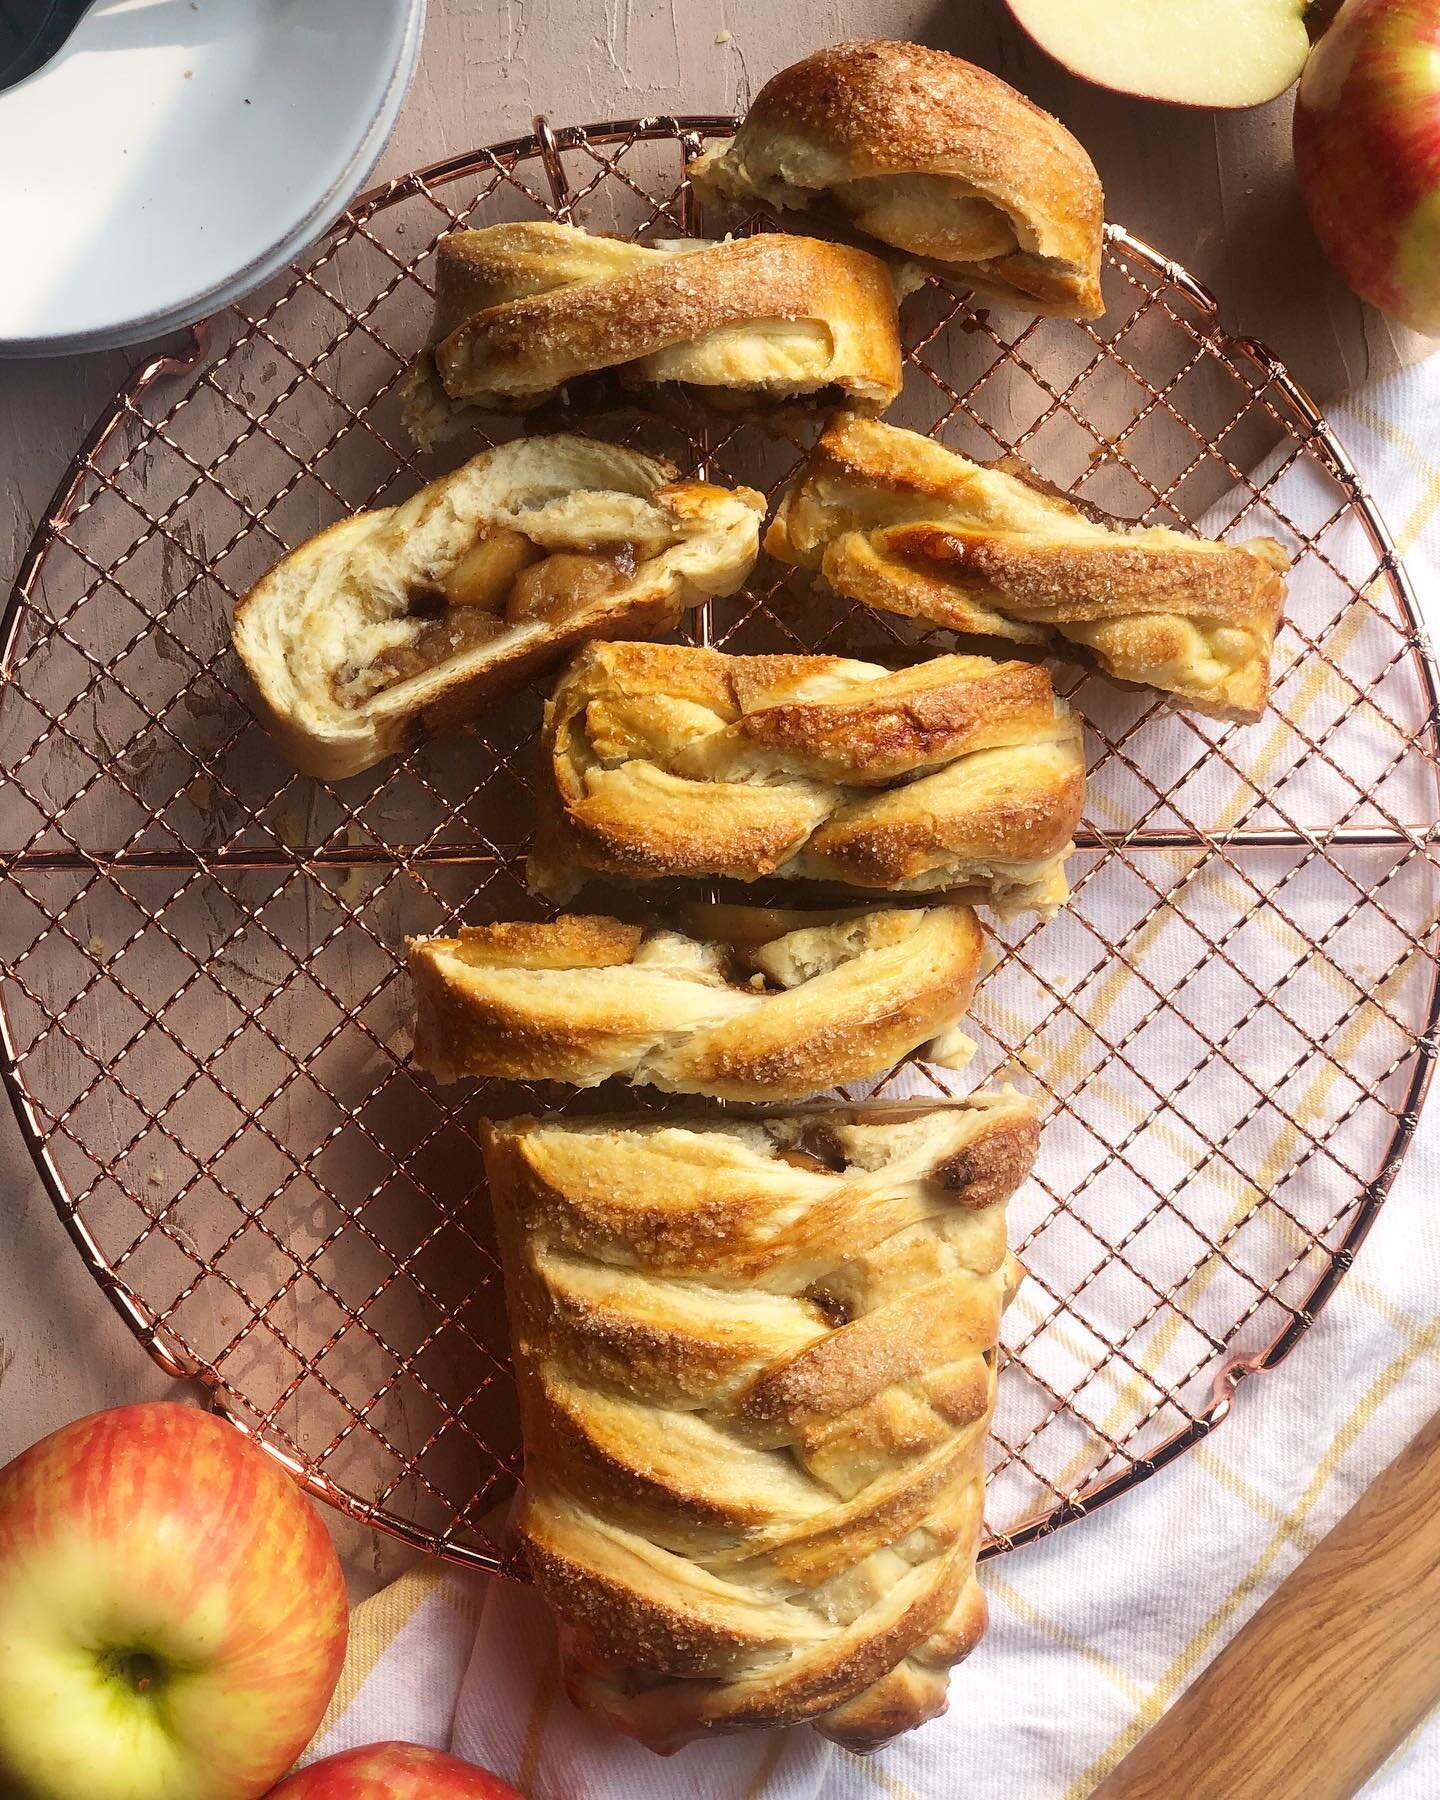 Apples👏🏻 are👏🏻 here👏🏻 !!!!!
Kick off the season right with my Braided Apple Bread! 🍎 
Get the recipe on the blog now (plus sustainability tips as always!) 👩🏼&zwj;🌾🌱
.
.
.
#apples #appleseason #applepicking #appleorchard #fall #fallvibes #d